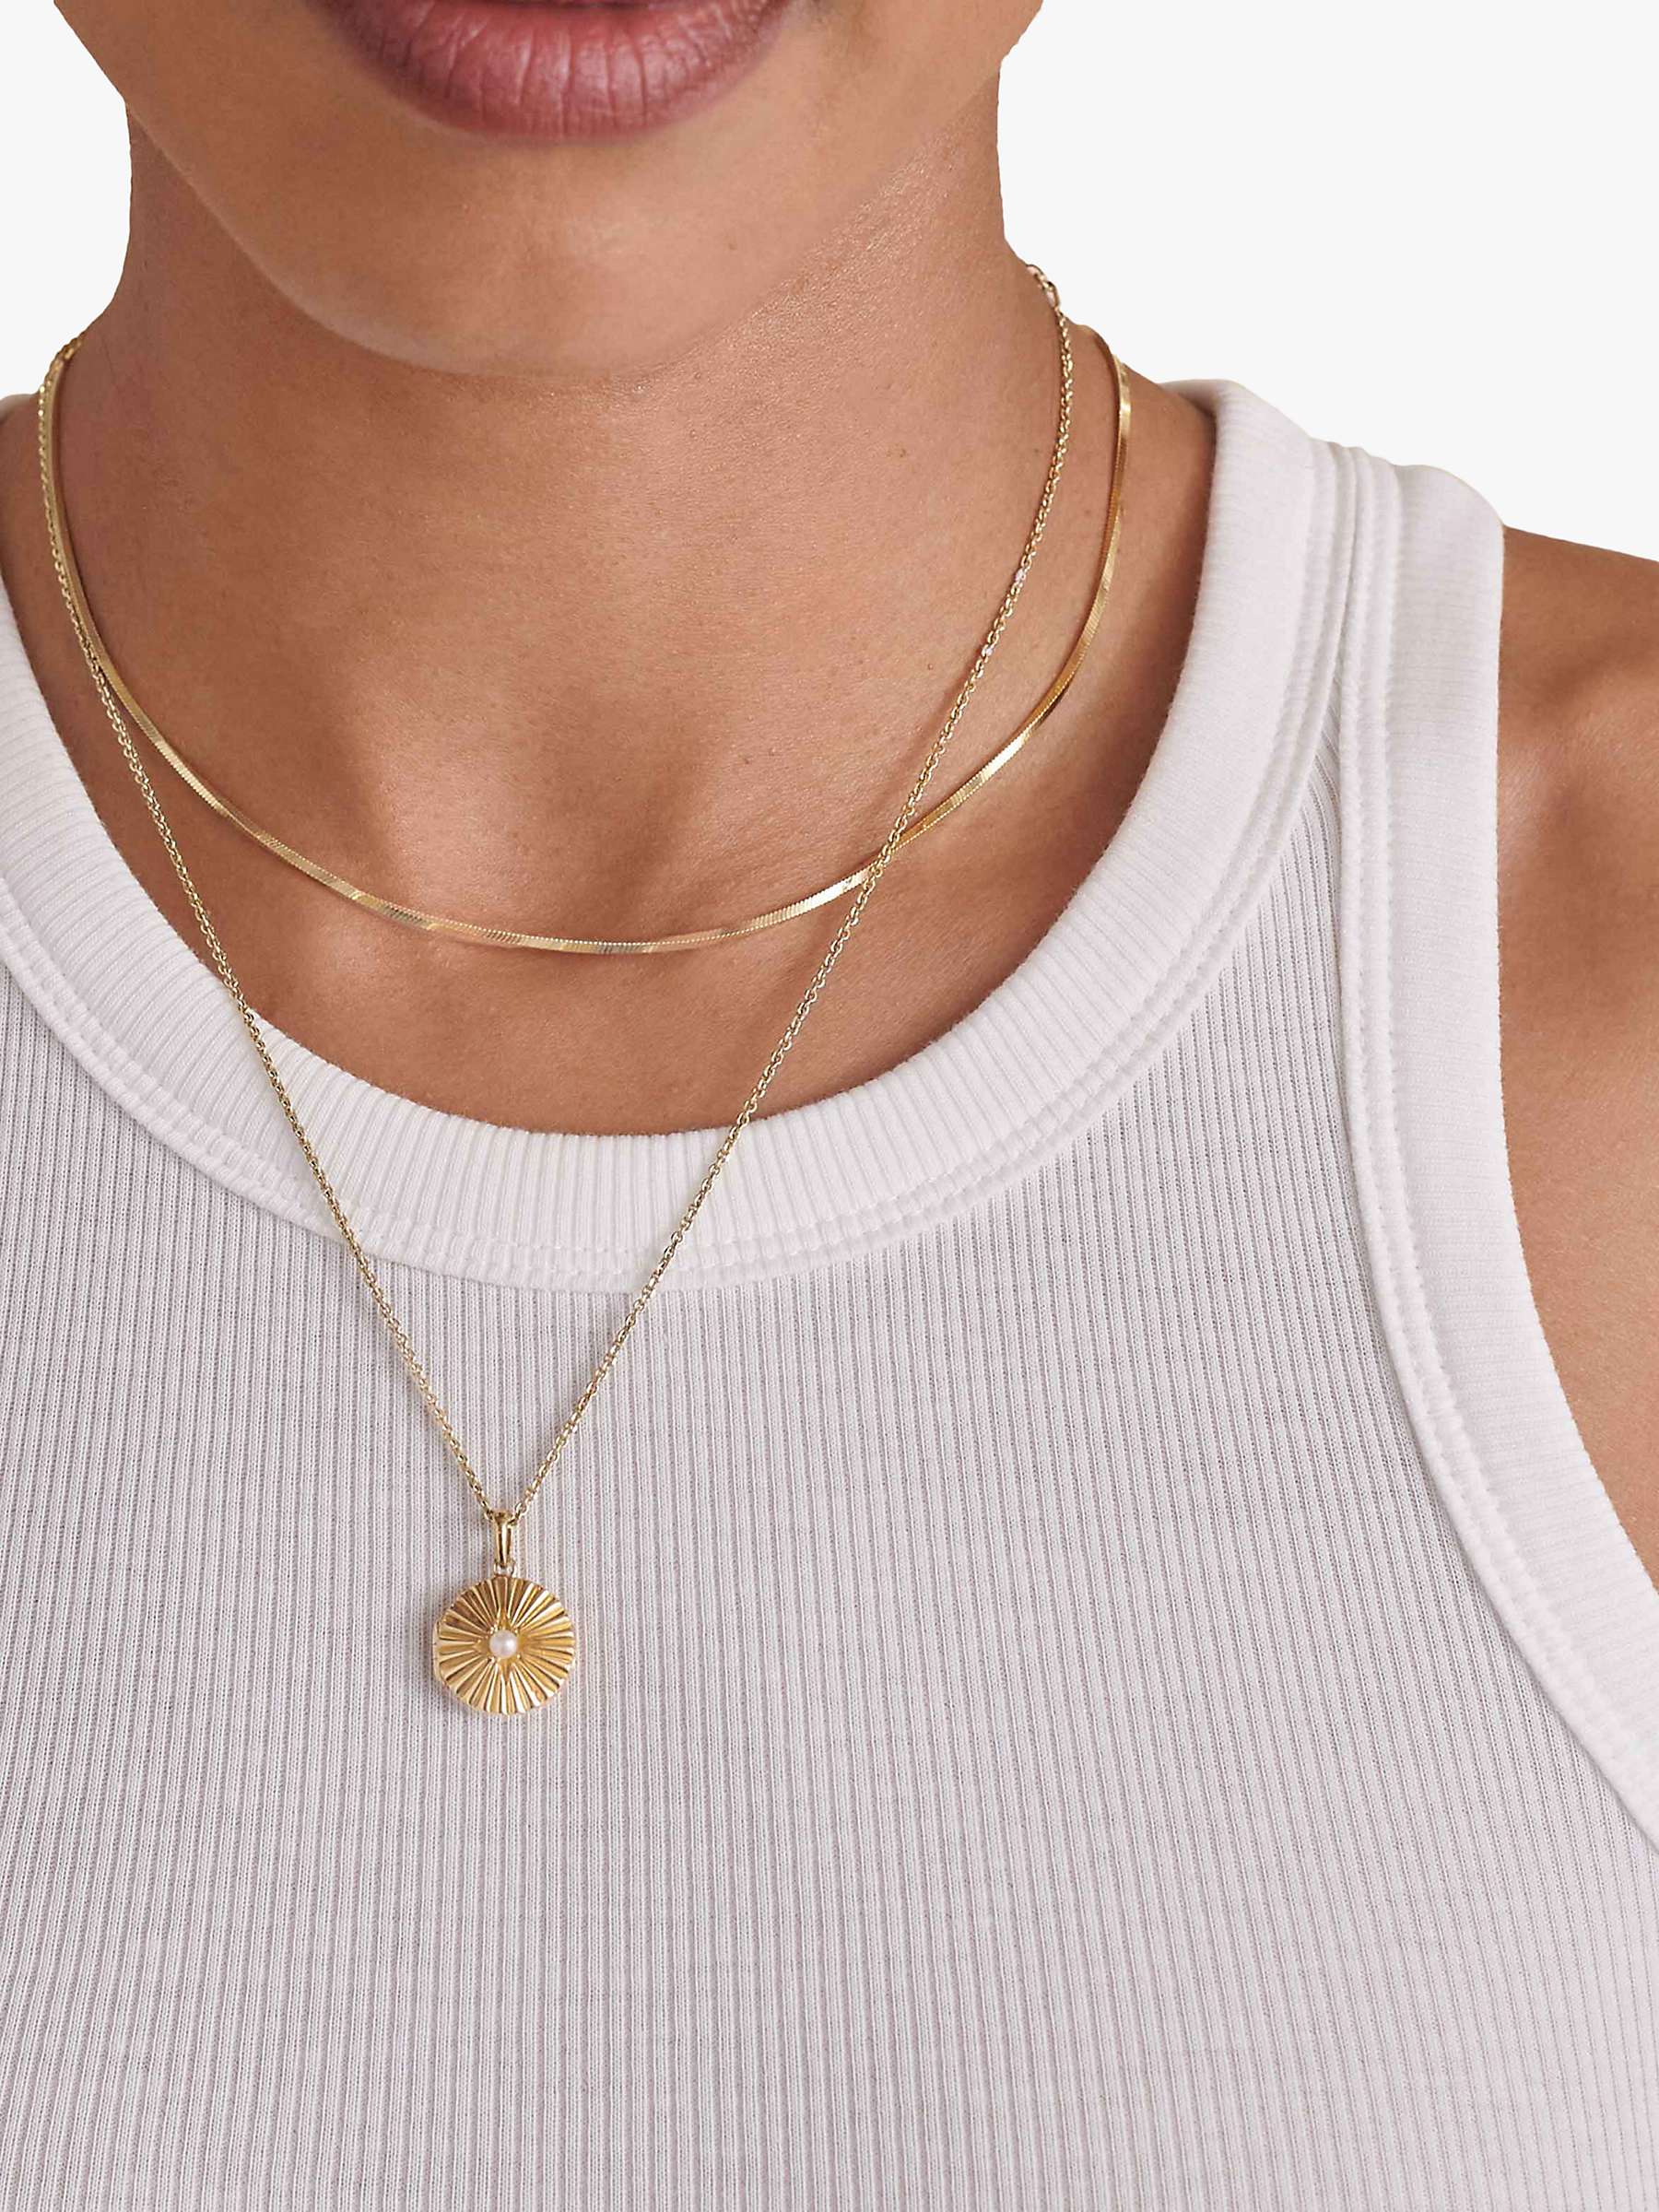 Buy Edge of Ember Freshwater Pearl Round Locket Necklace, Yellow Gold Online at johnlewis.com